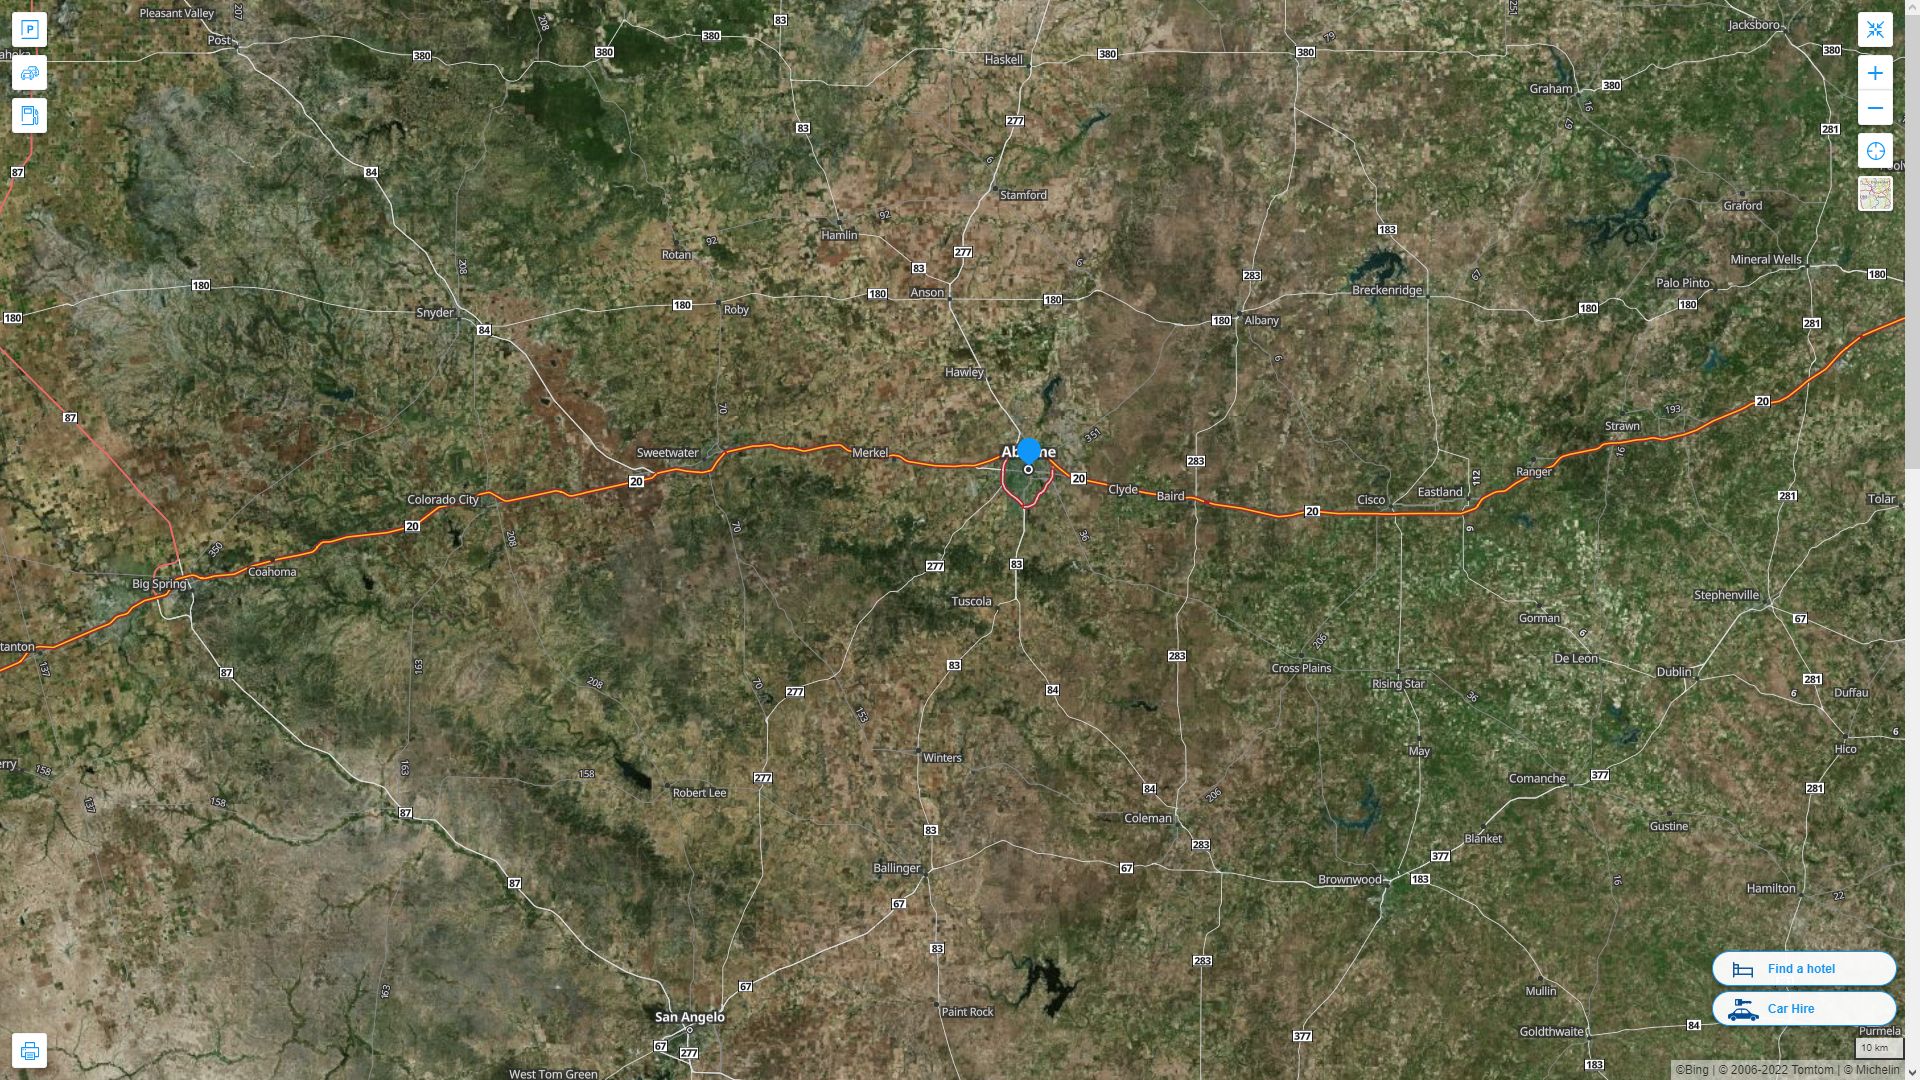 Abilene Texas Highway and Road Map with Satellite View